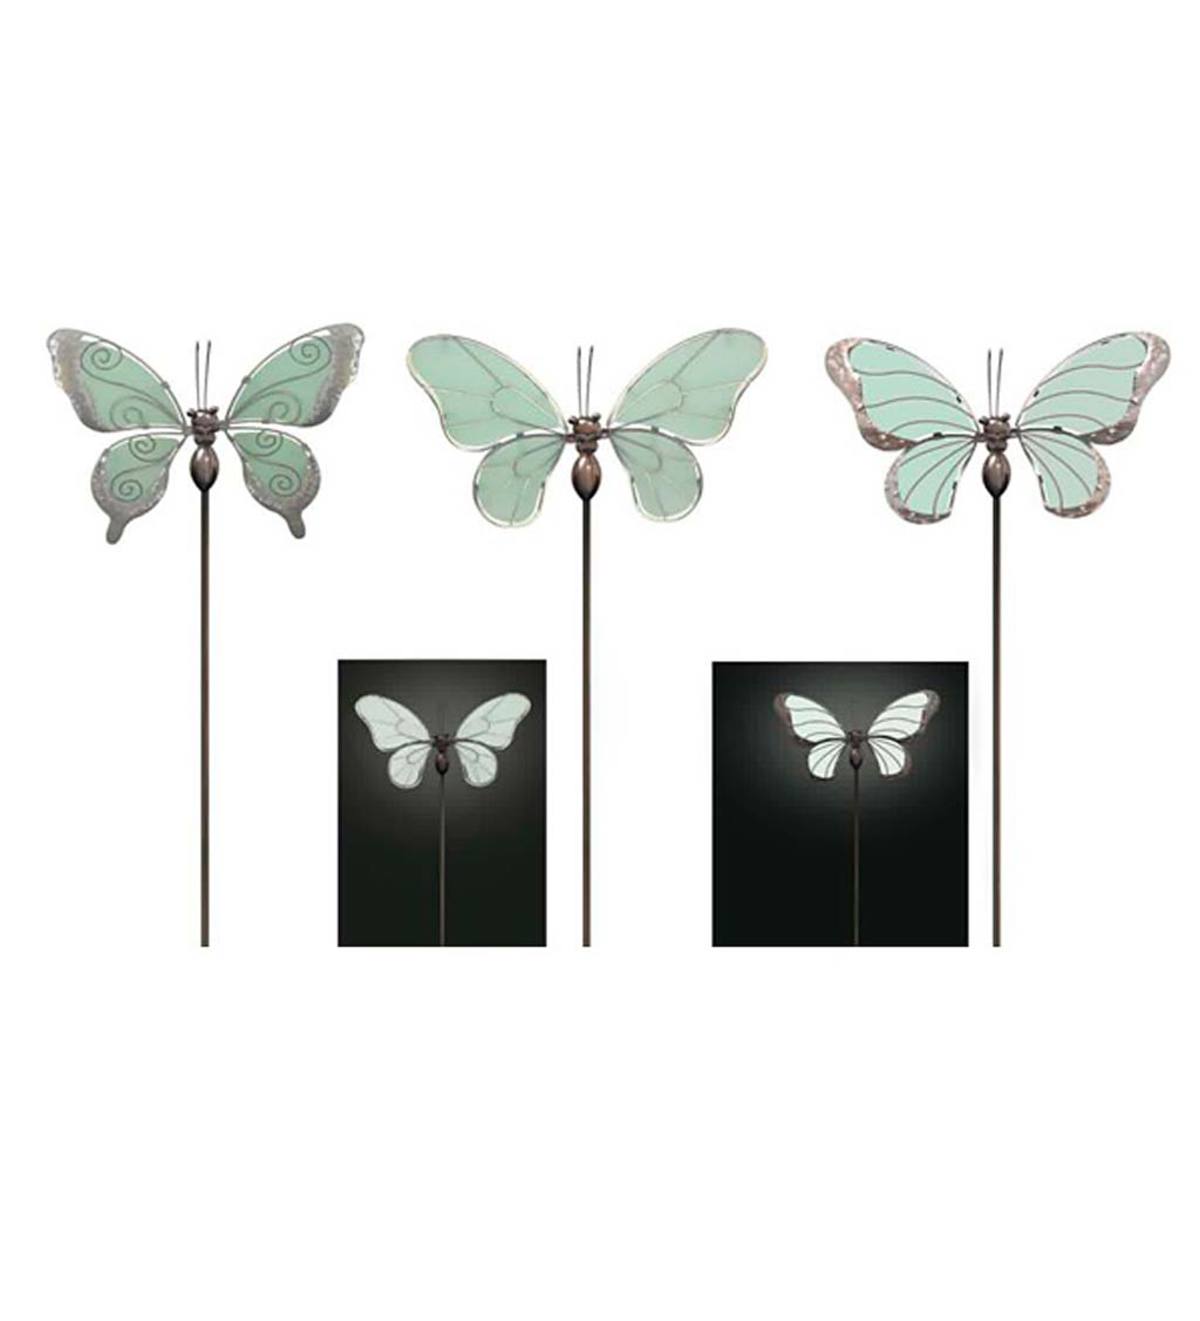 Glow-in-the-Dark Butterfly Stakes, Set of 3